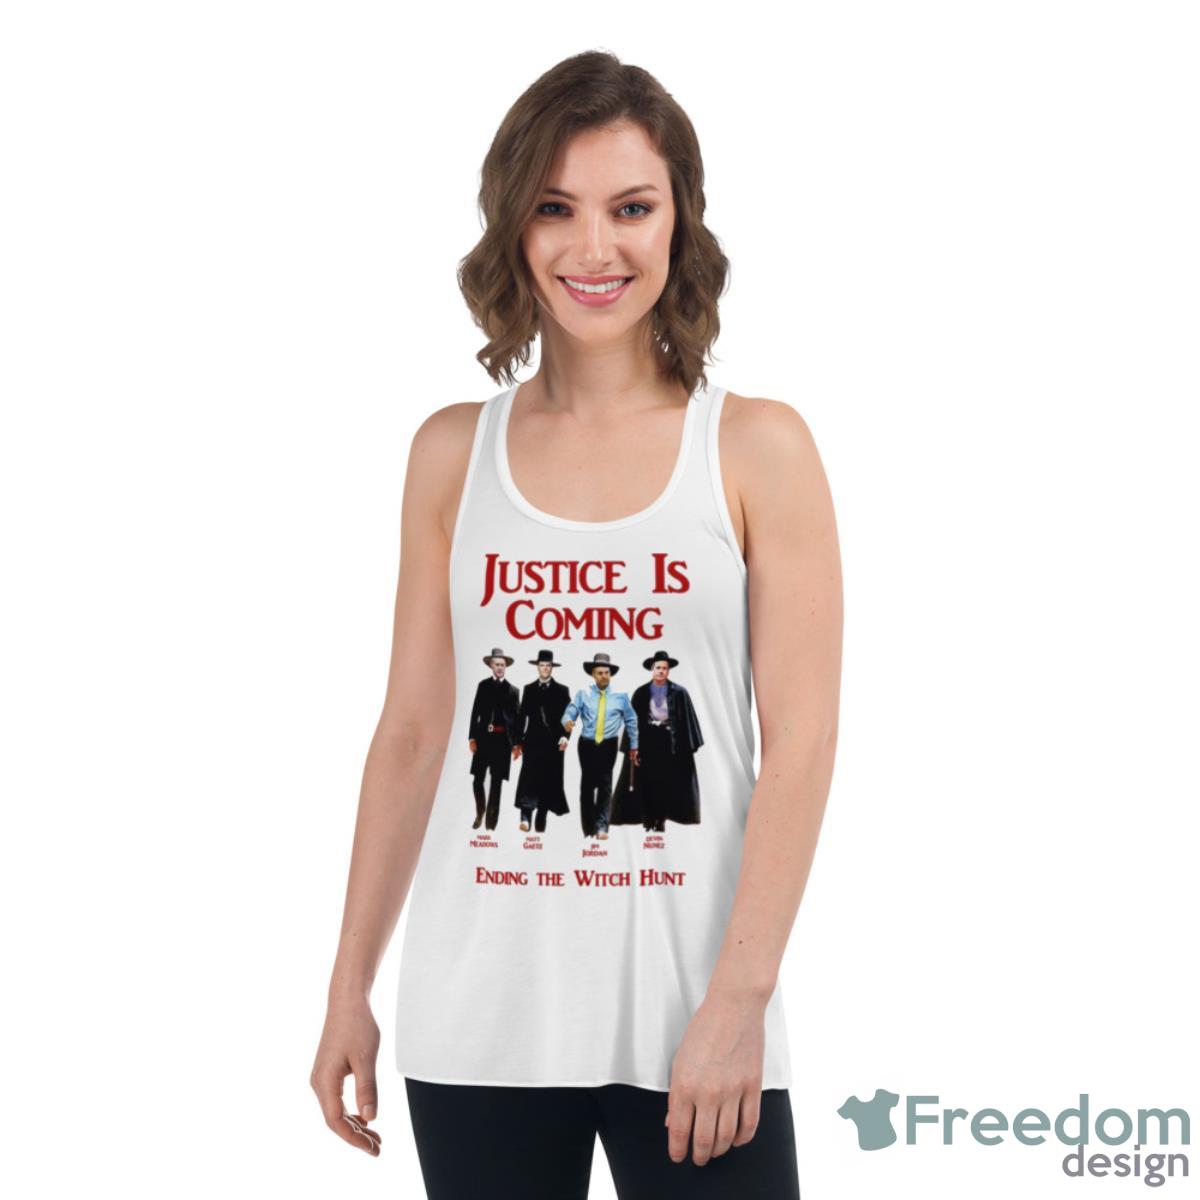 Justice Is Coming Ending The Witch Hunt Jim Jordan & Others Shirt